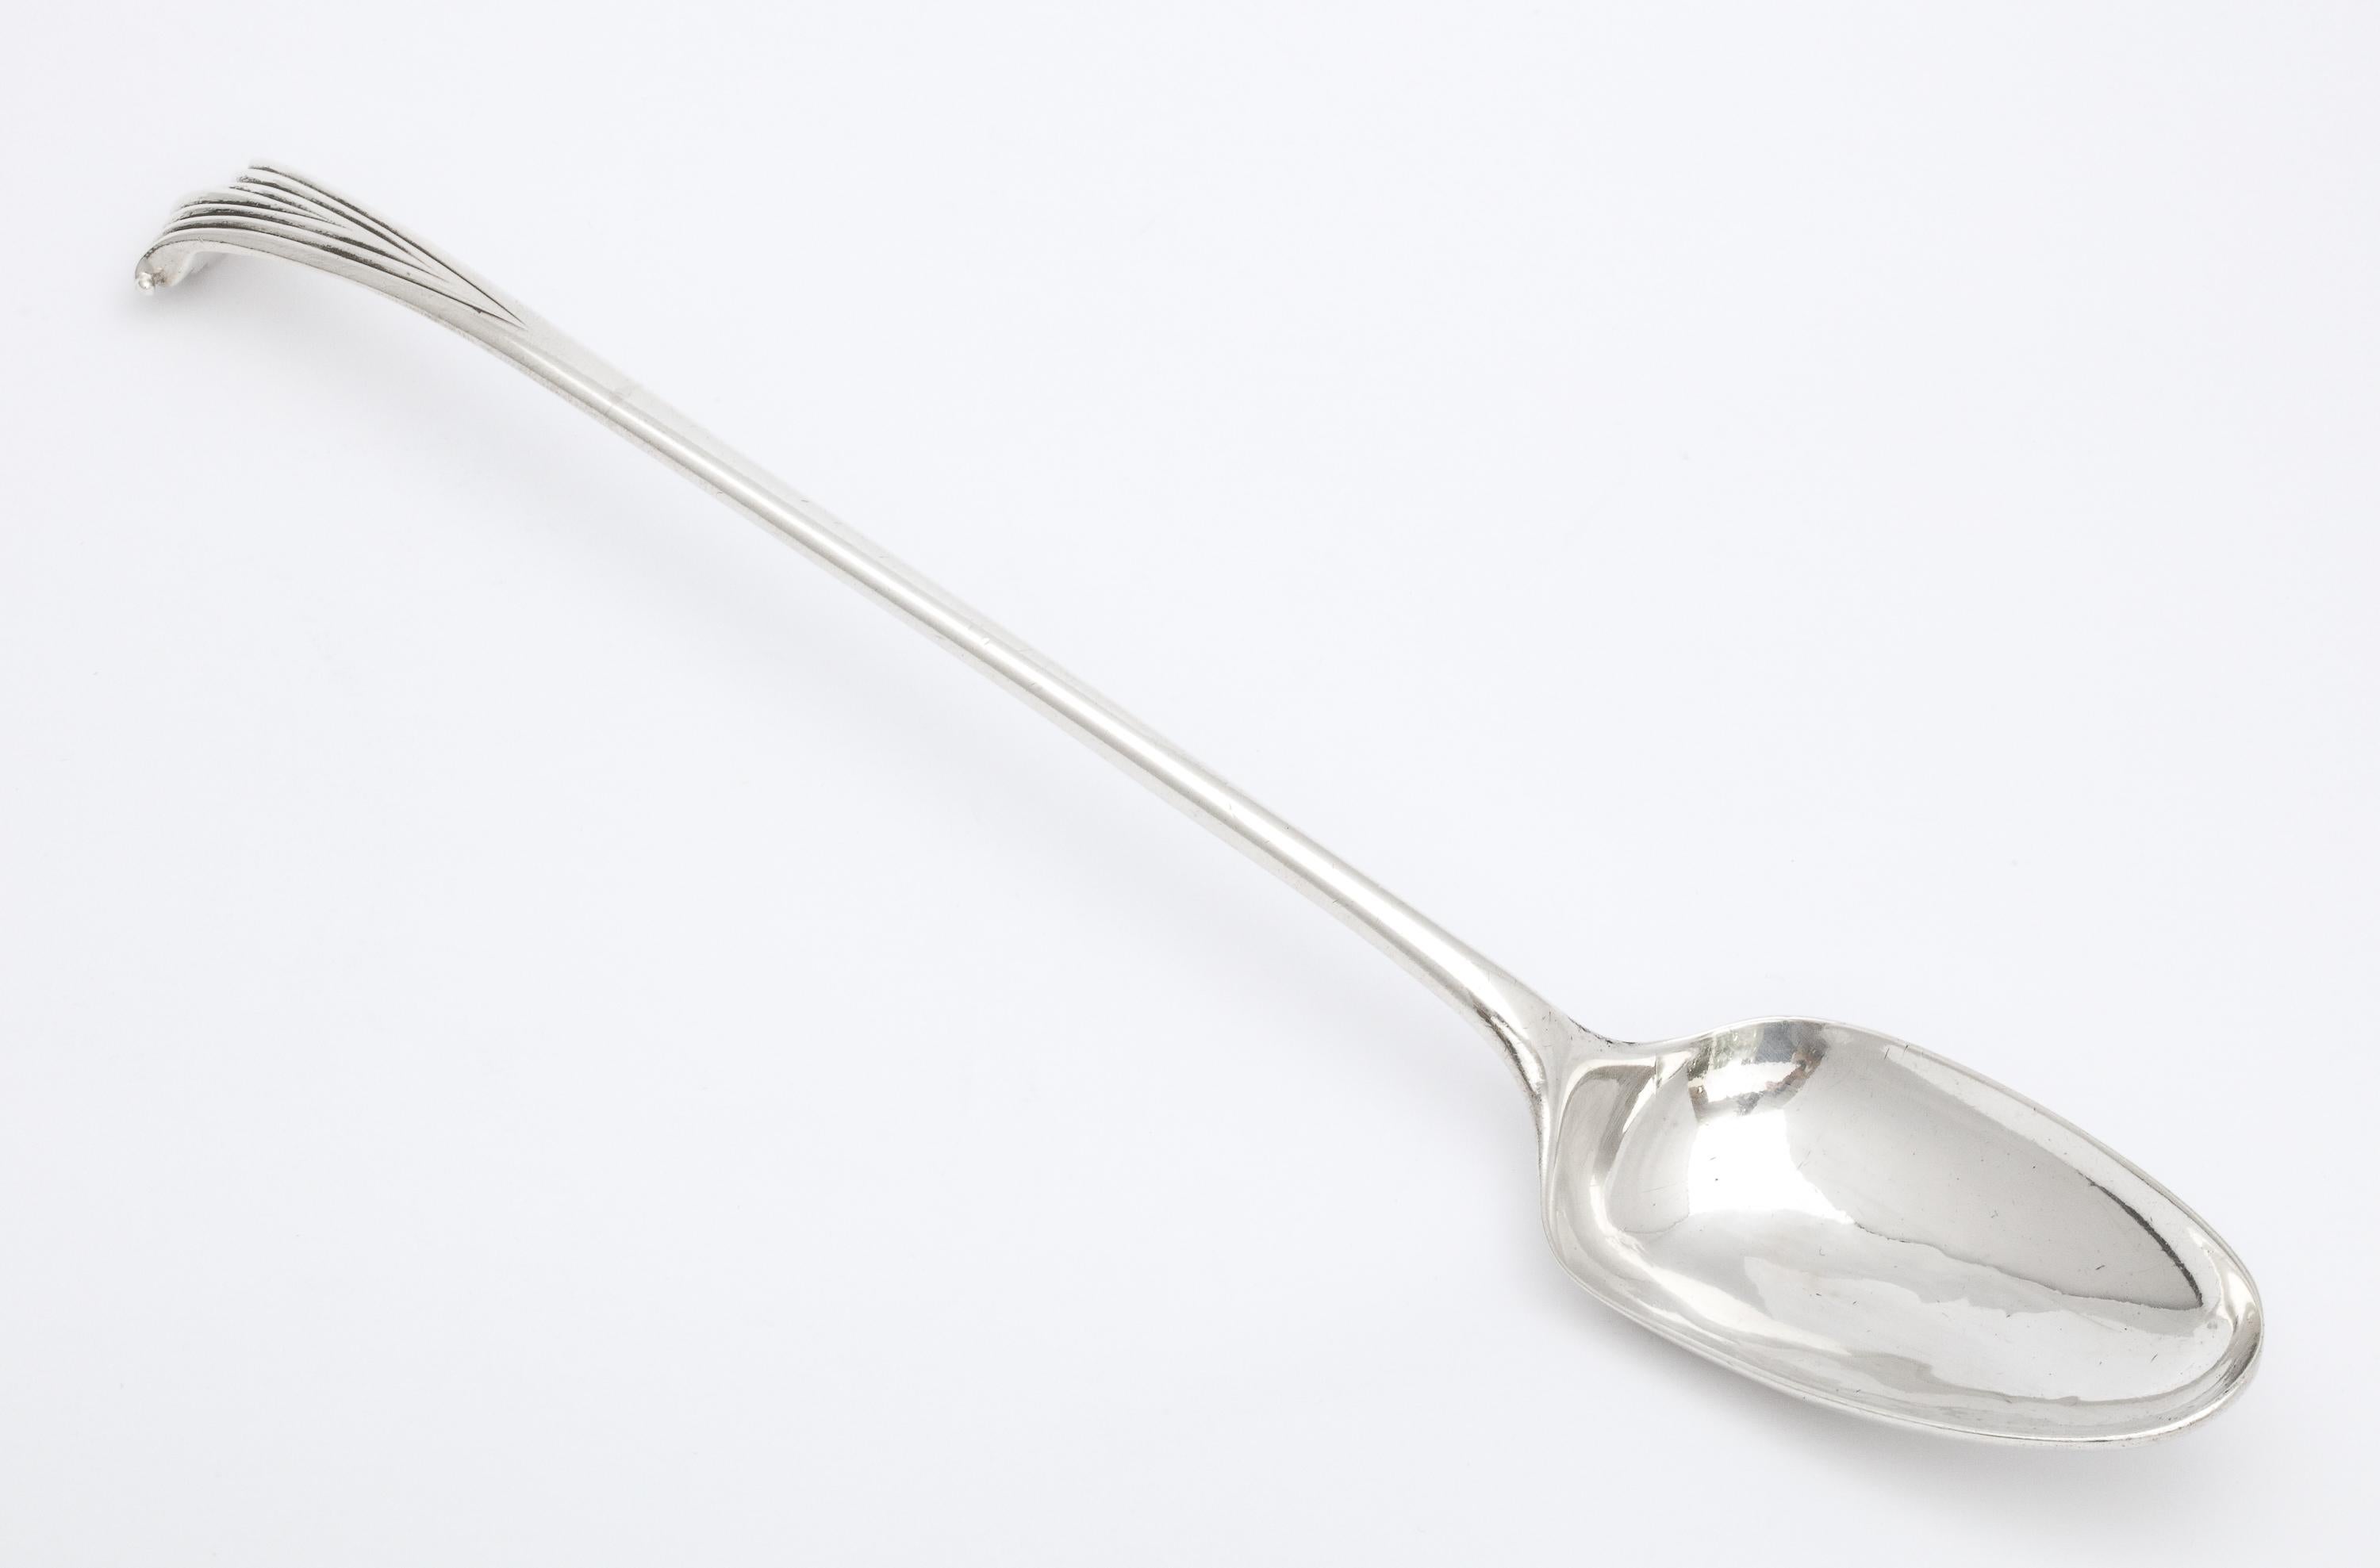 George II, Onslow pattern, sterling silver stuffing spoon, London, year hallmarked for 1745, Thomas Dene - maker. Measures 10 1/2 inches long x over 1 3/4 inches deep (at deepest point) x 1 1/2 inches high (when lying flat). Dark spots on silver in